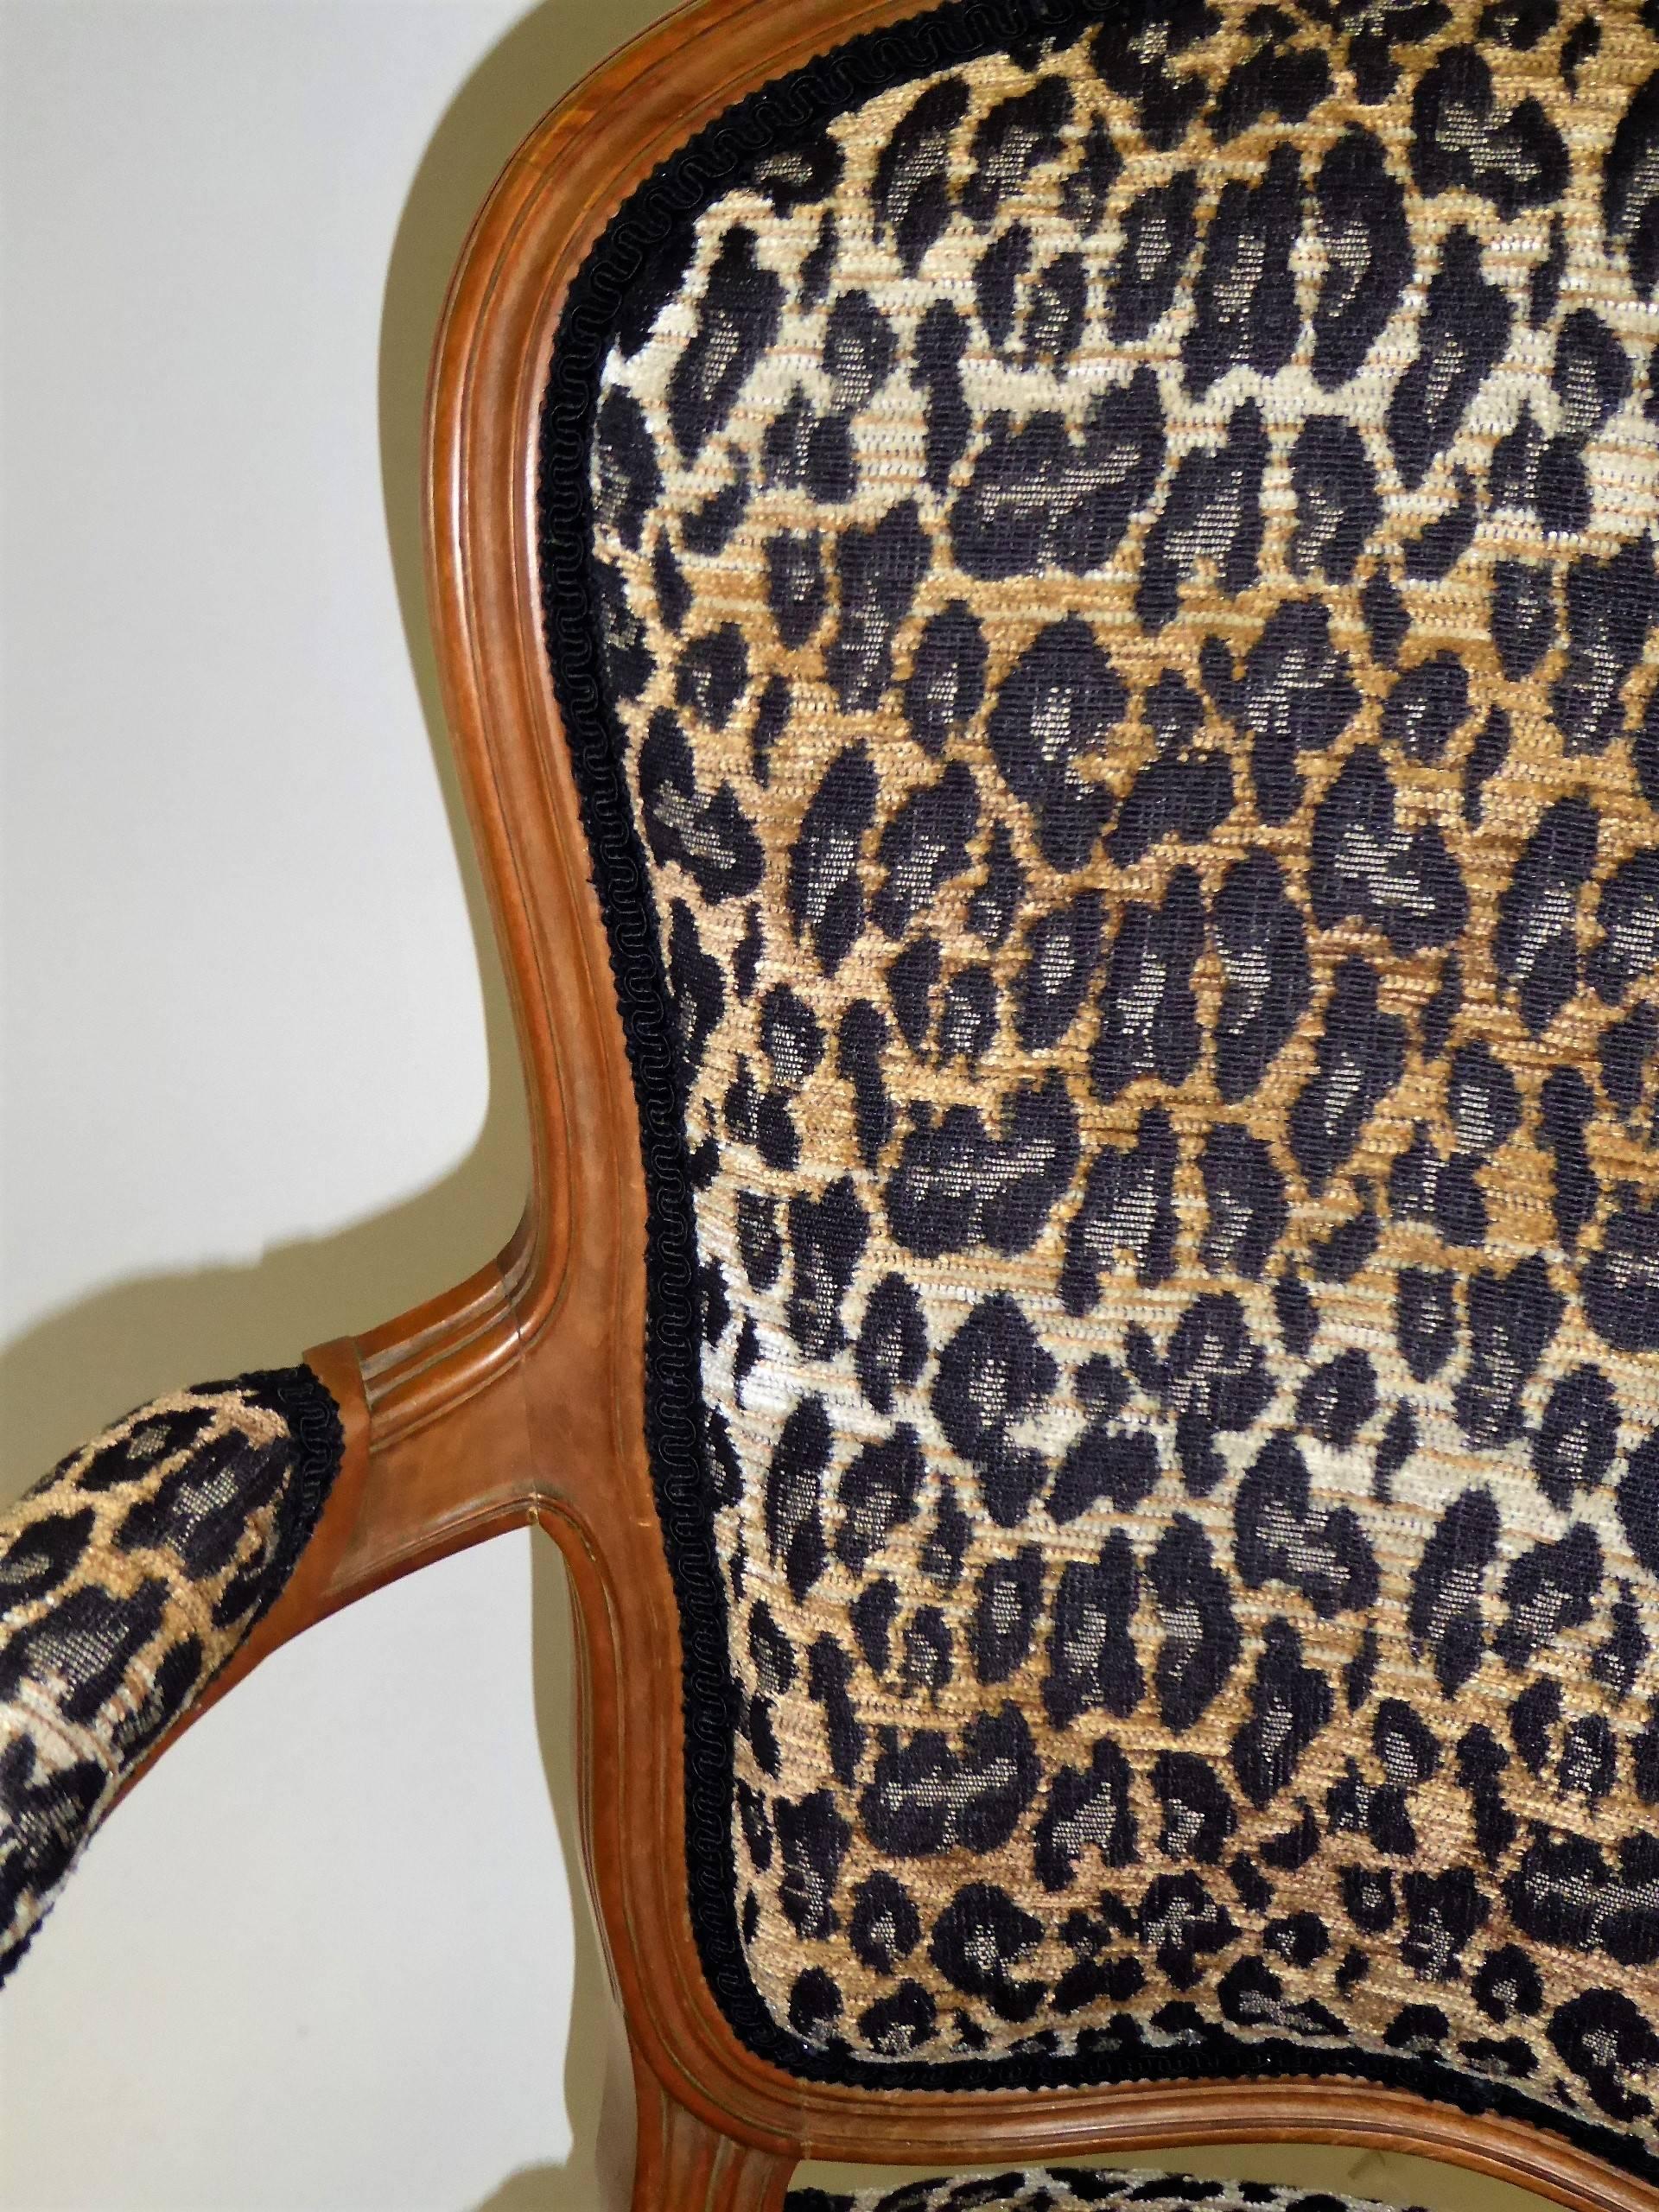  Pair of Louis XV Style Chauffeuses or Fauteuils by Saridis in Leopard Chenille  1